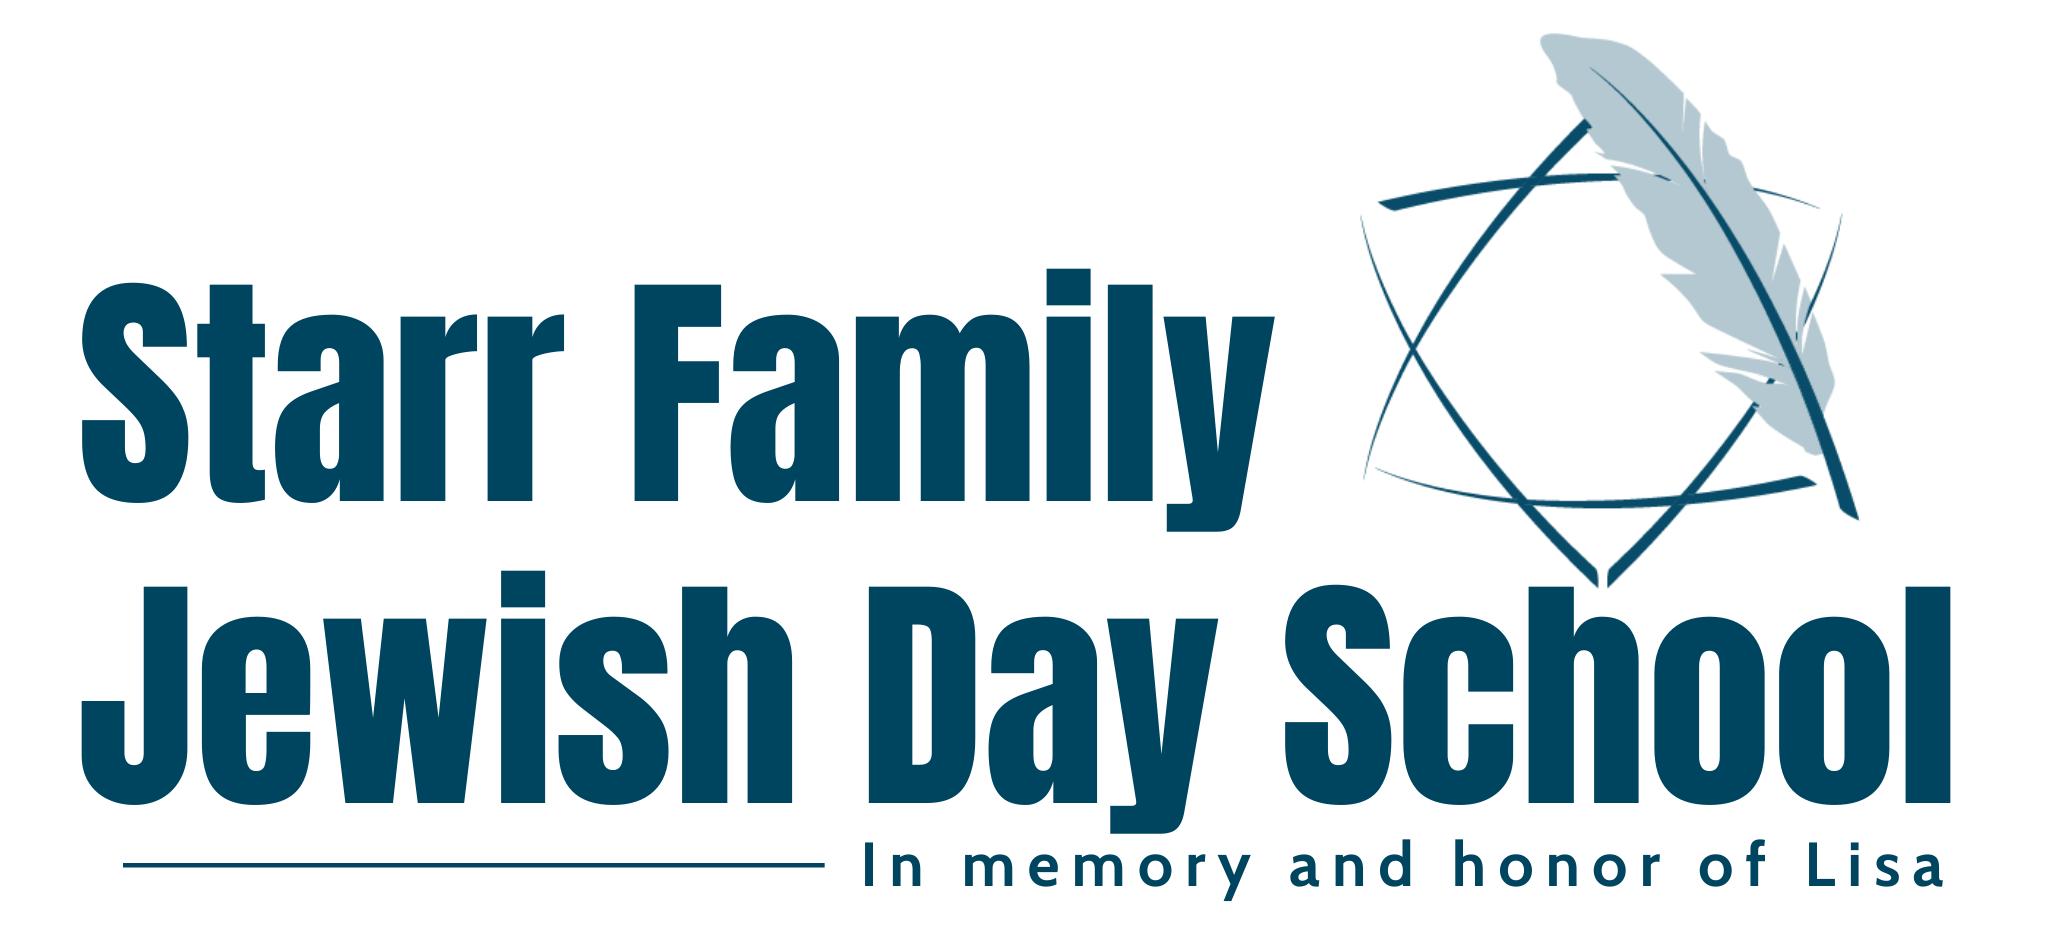 The Starr Family Jewish Day School